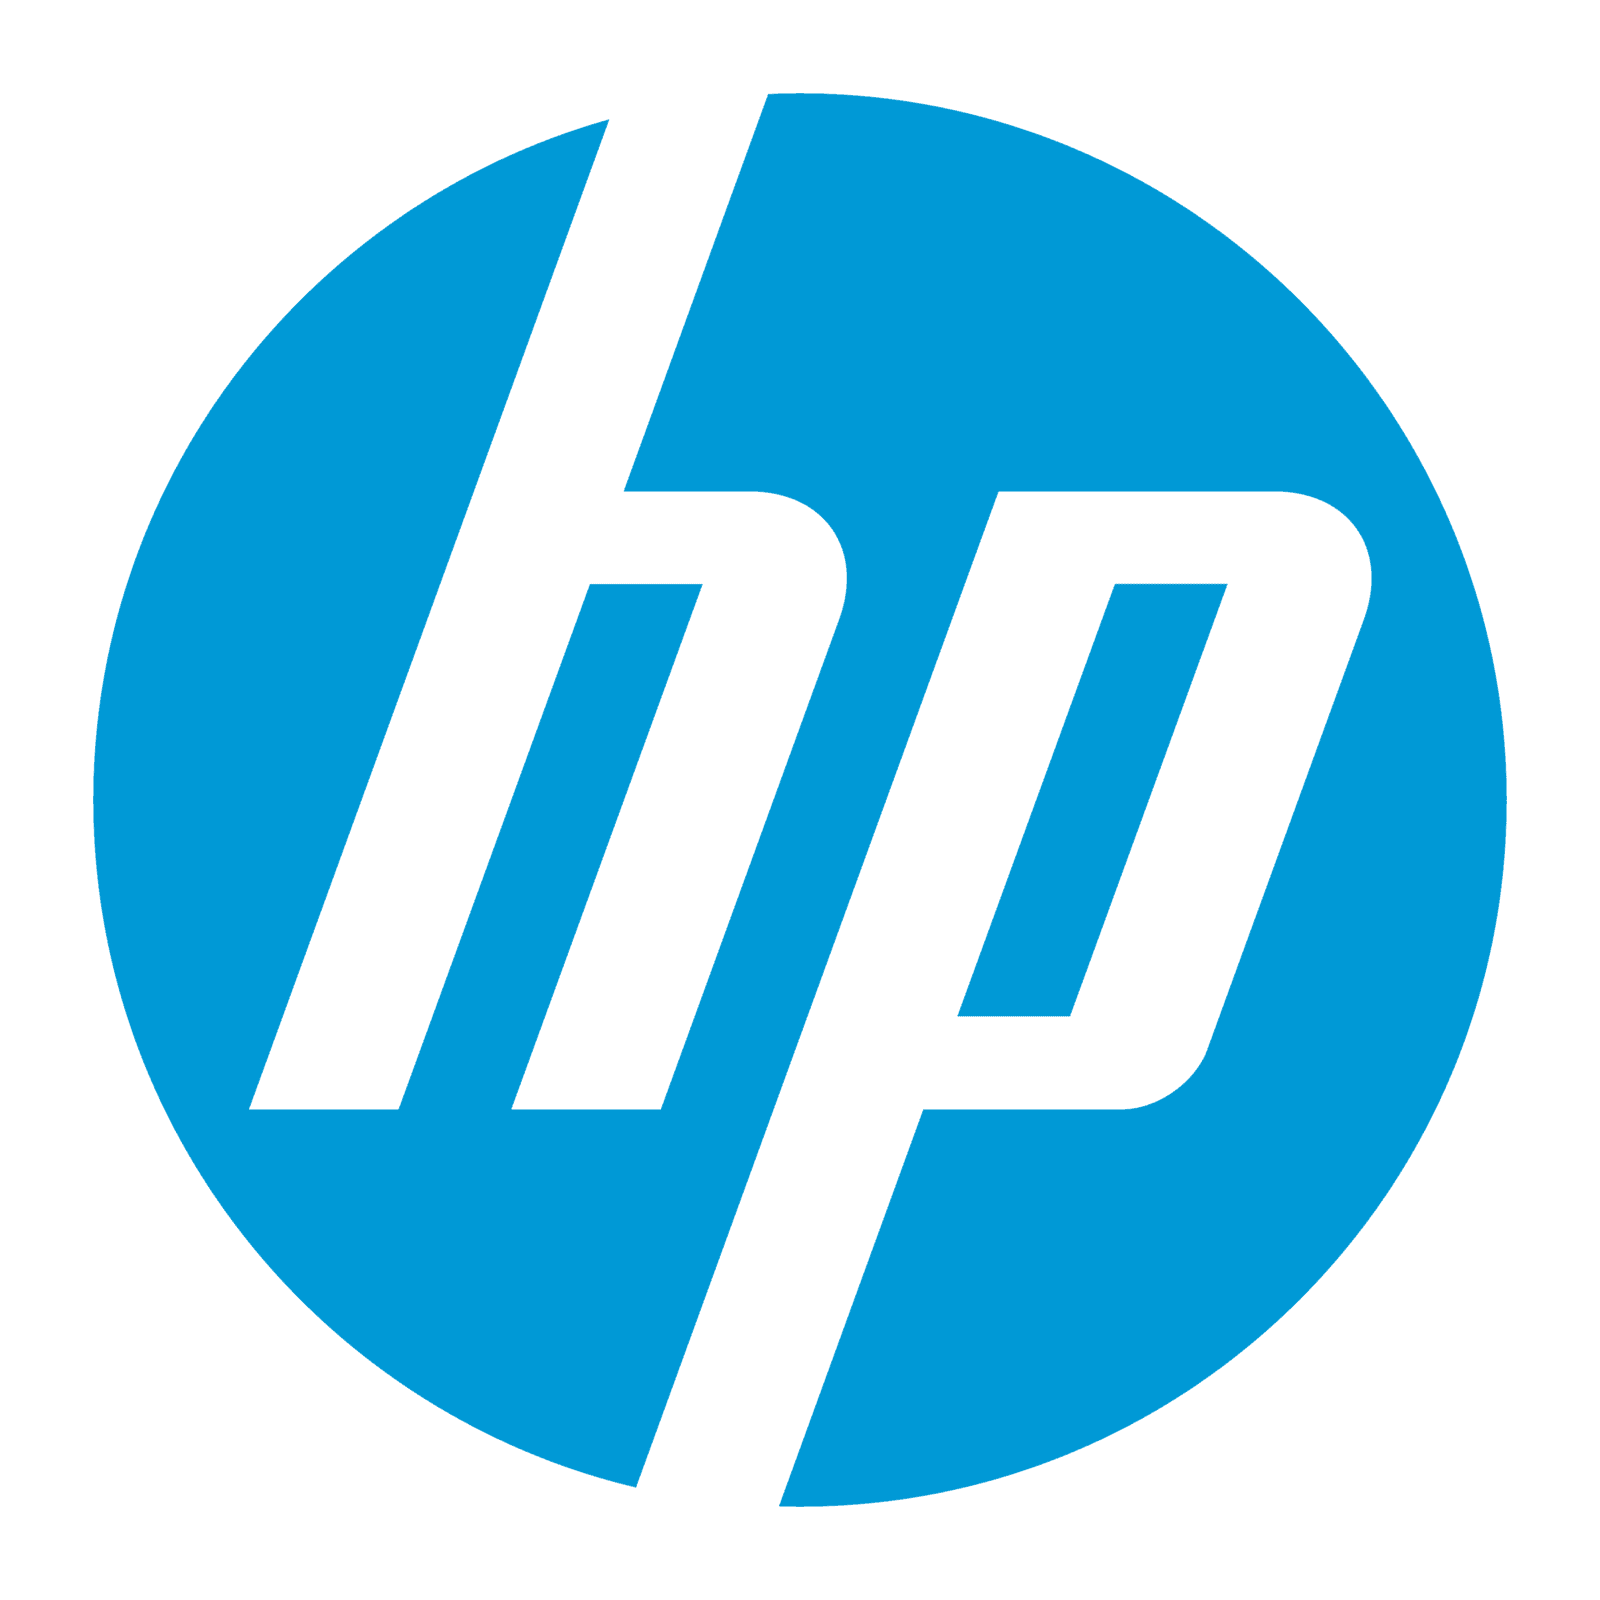 hp logo in blue and white